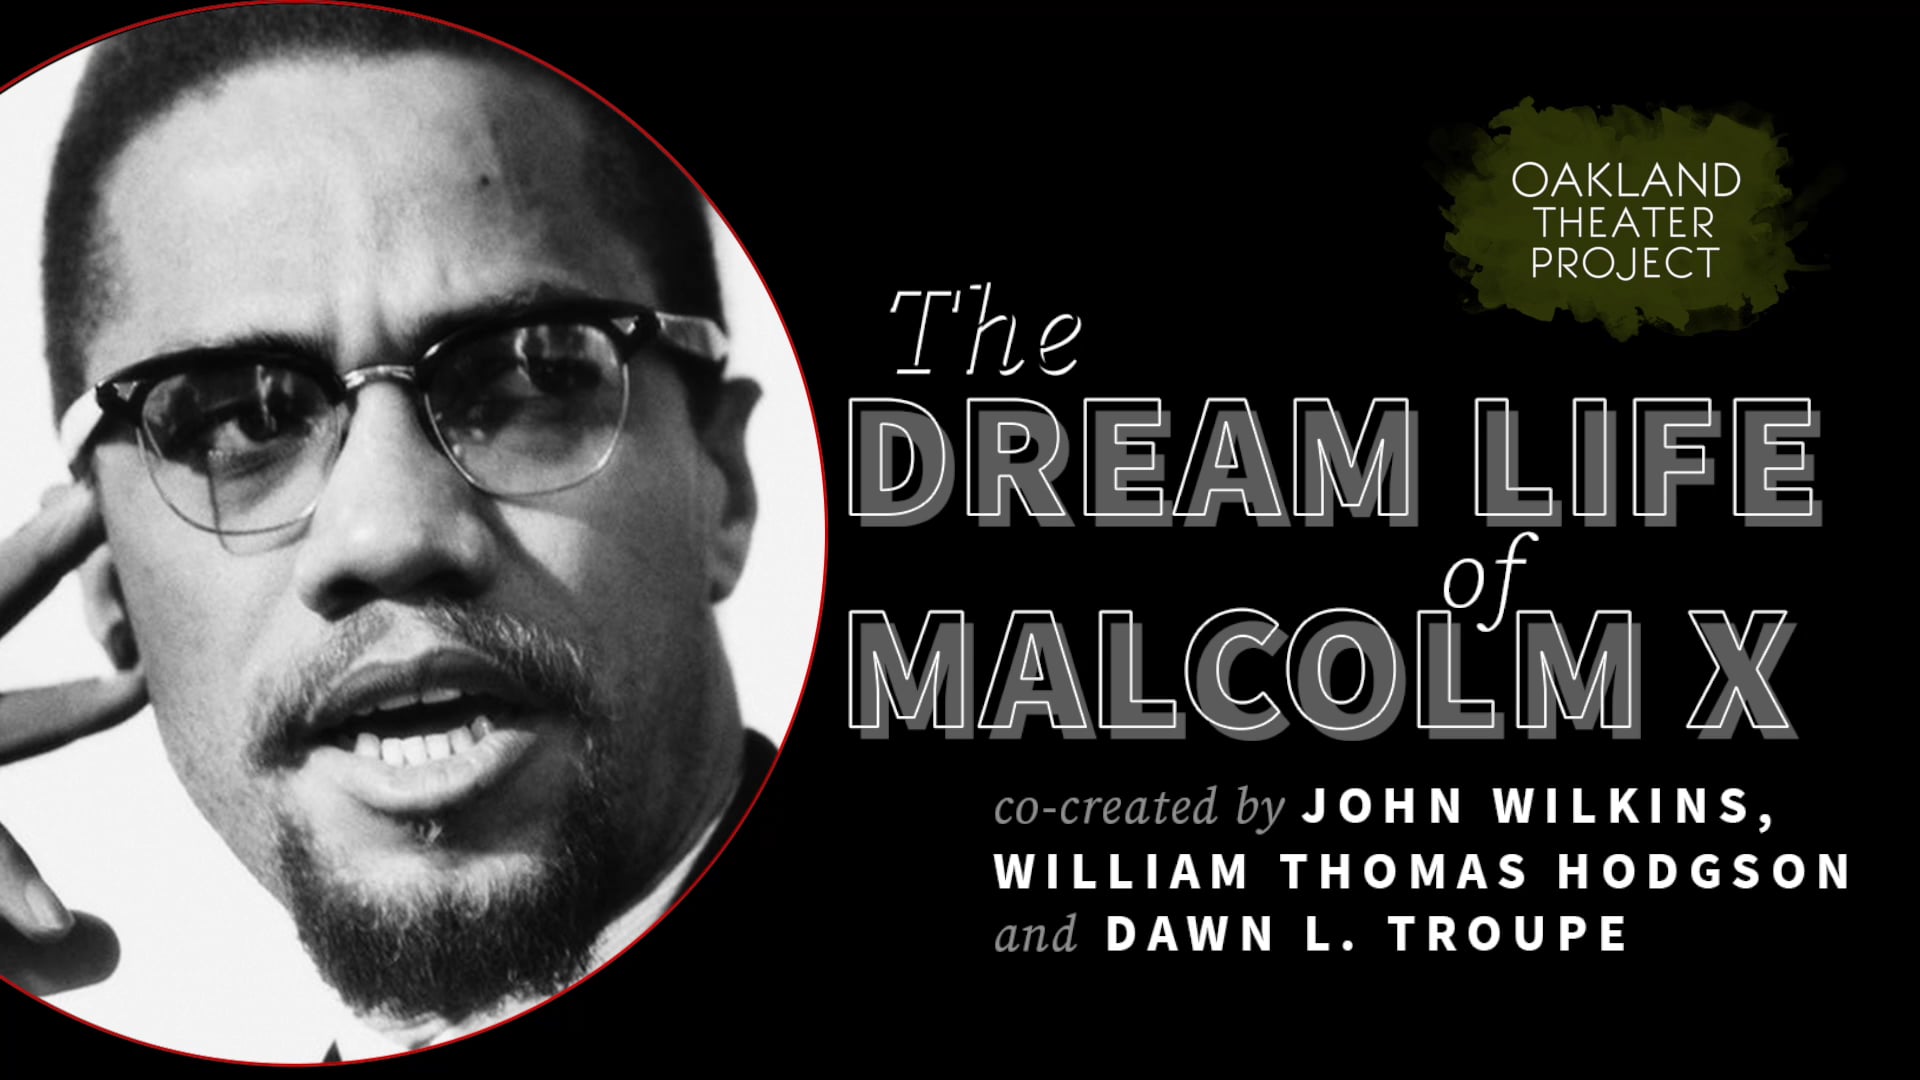 The Dream Life of Malcolm X, Oakland Theater Project